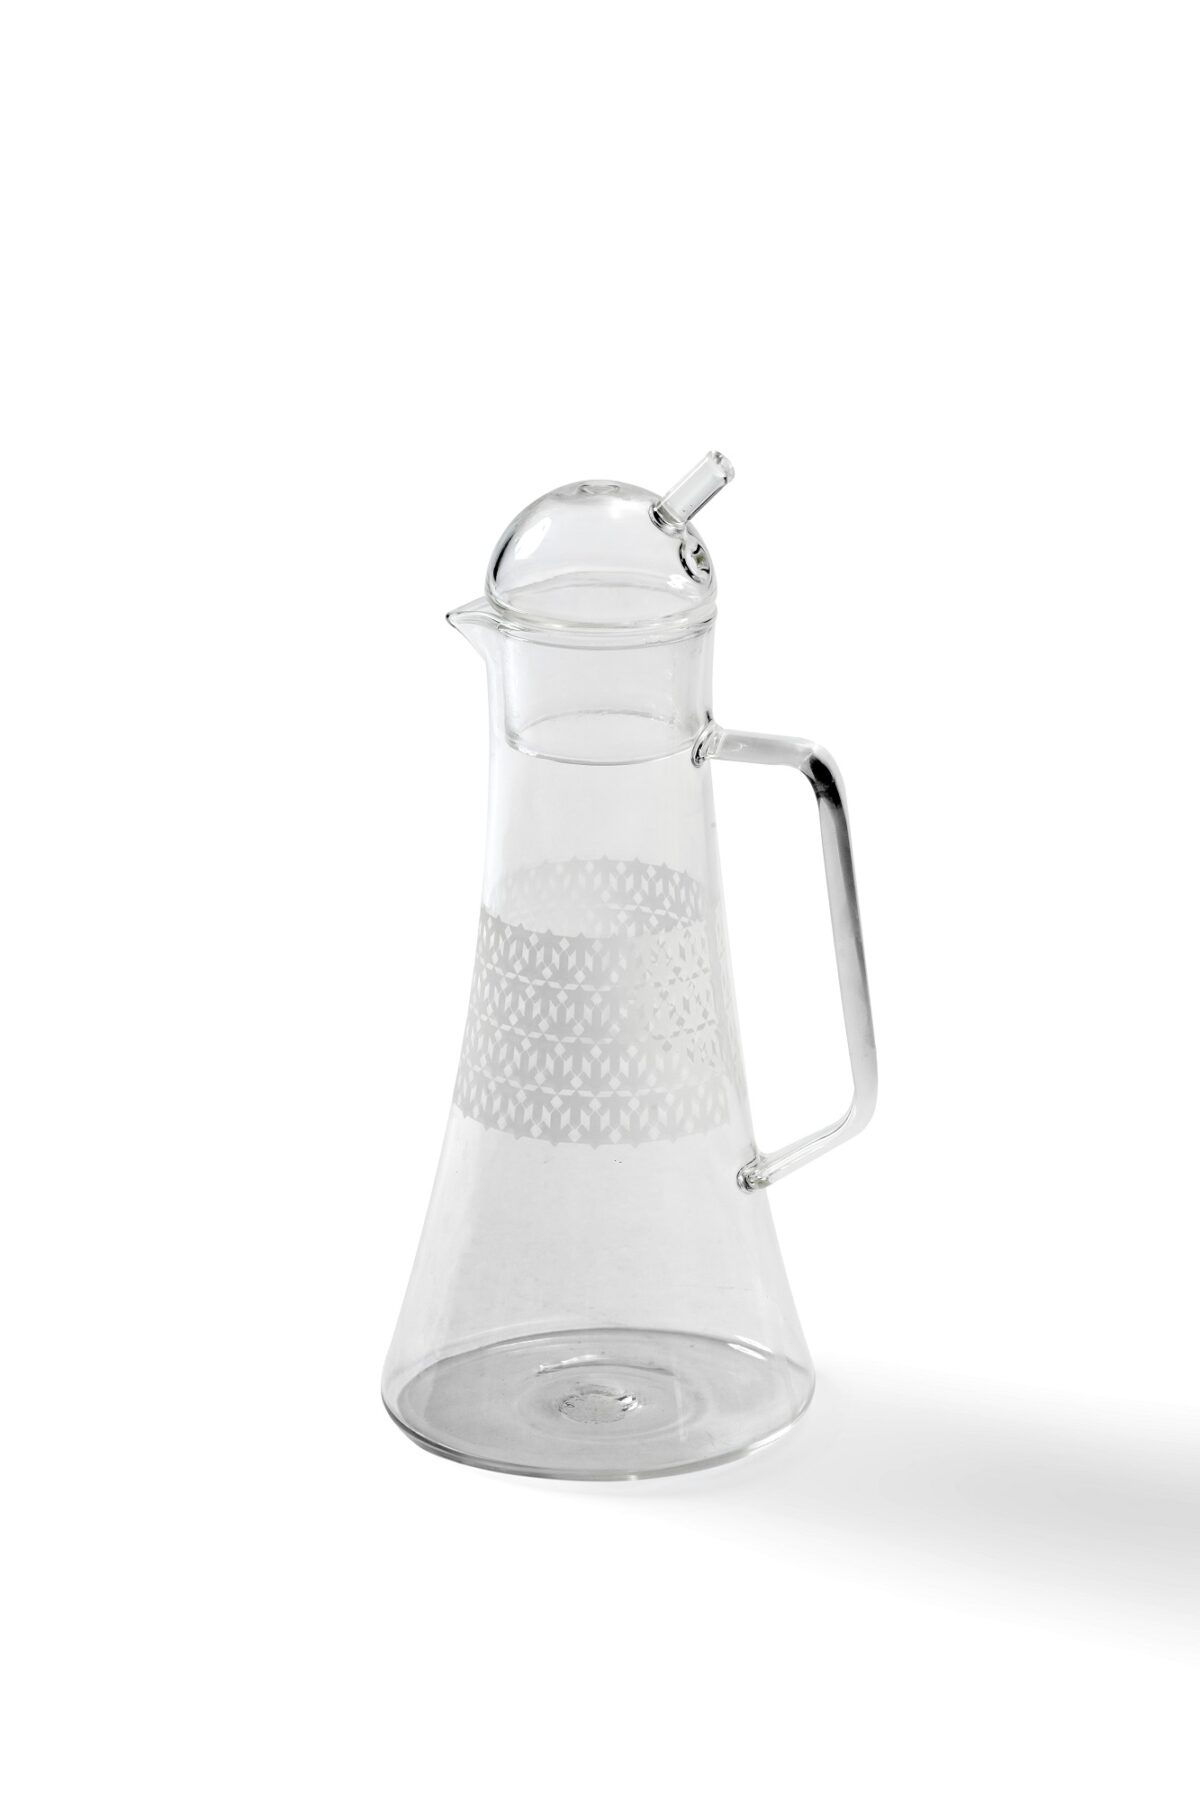 A glass Qahwa Arabic coffee pot with white print Isalmic geometric design, from the collection "Motif", with a capacity of 500ml. Suitable also for syrups.